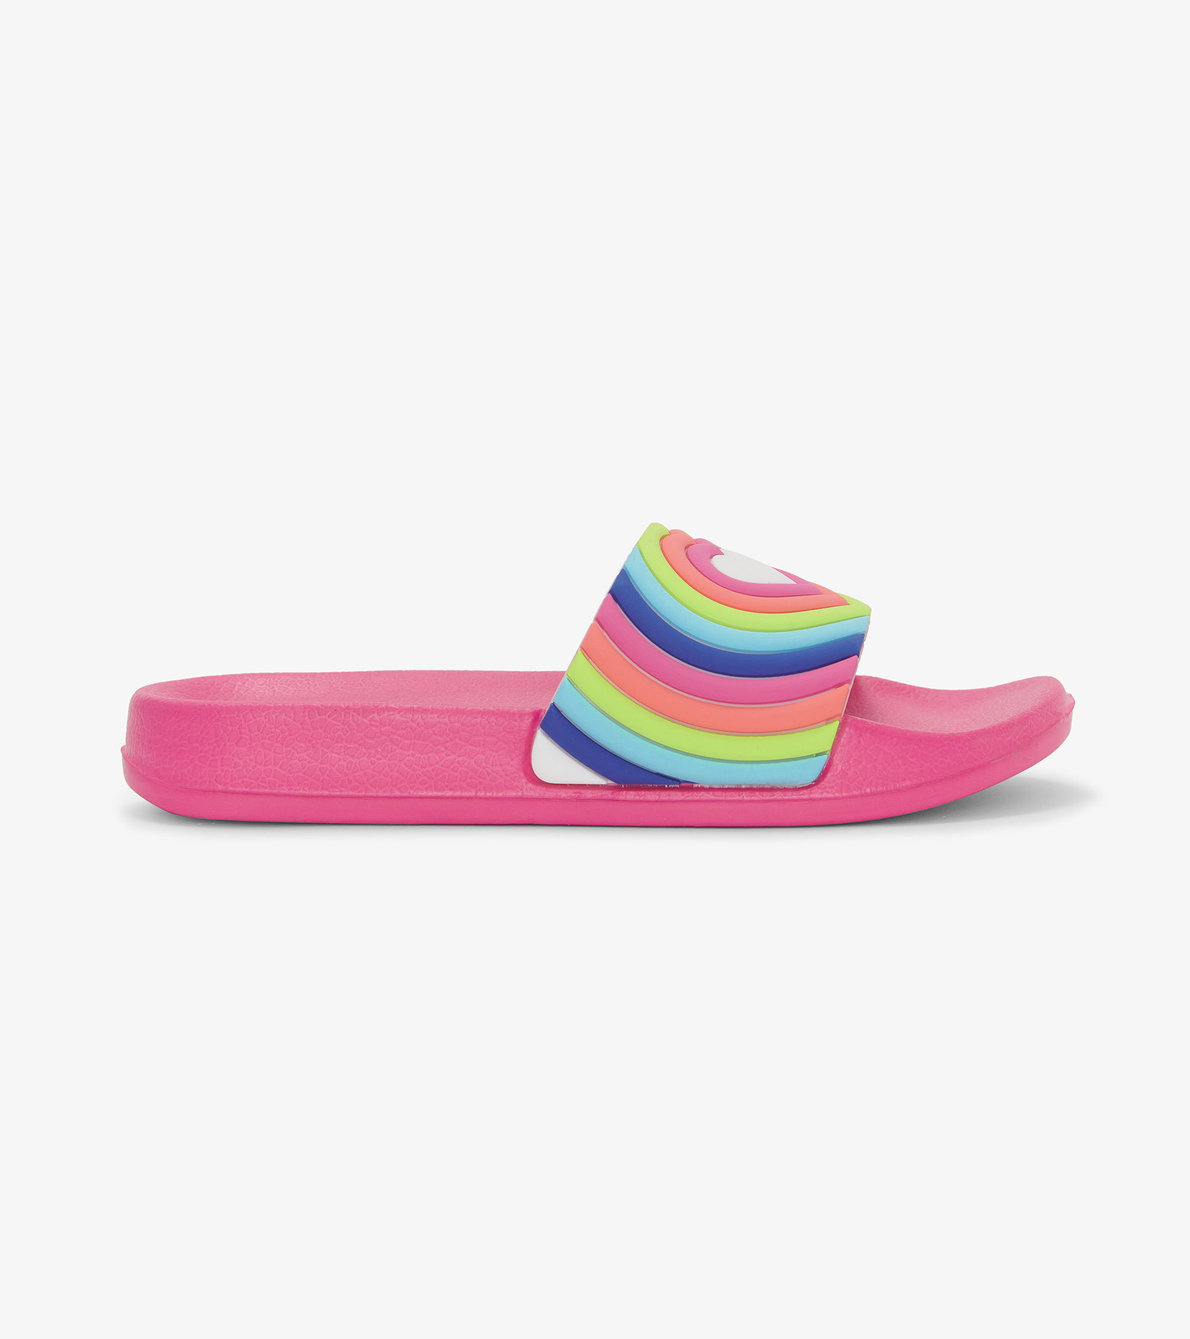 View larger image of Girls Rainbow Heart Slides